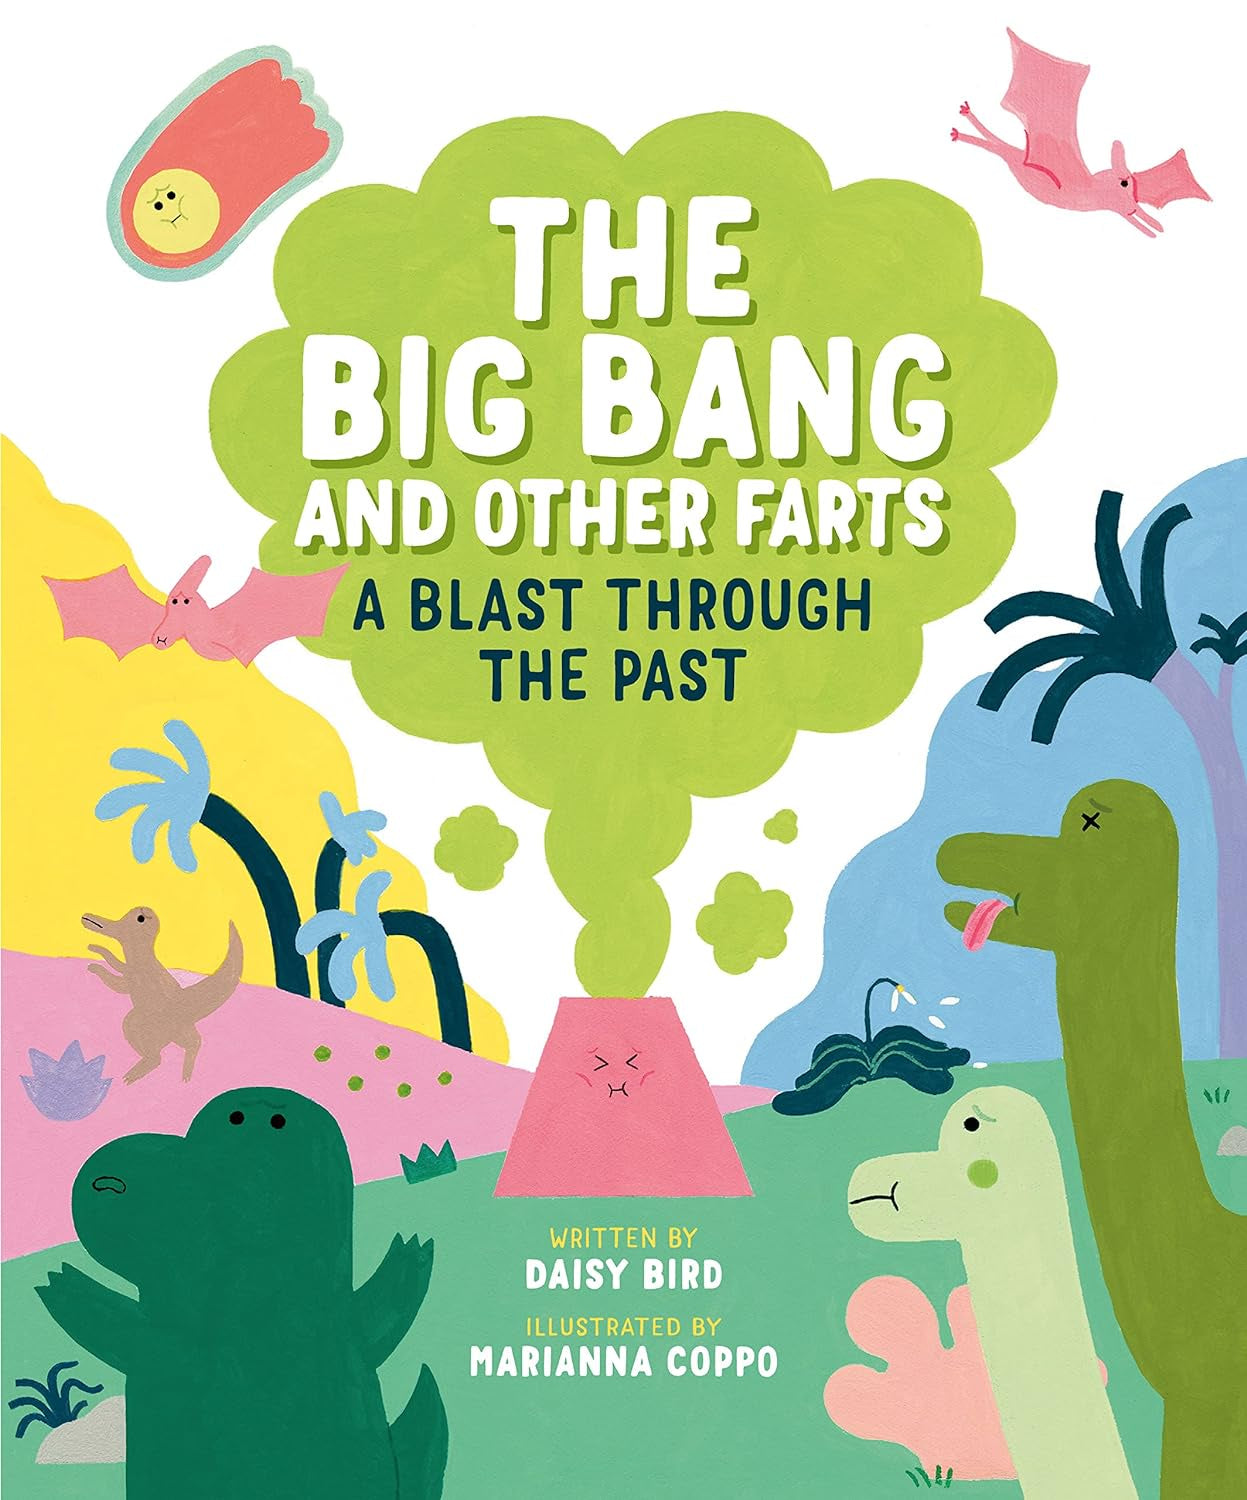 The Big Bang and Other Farts